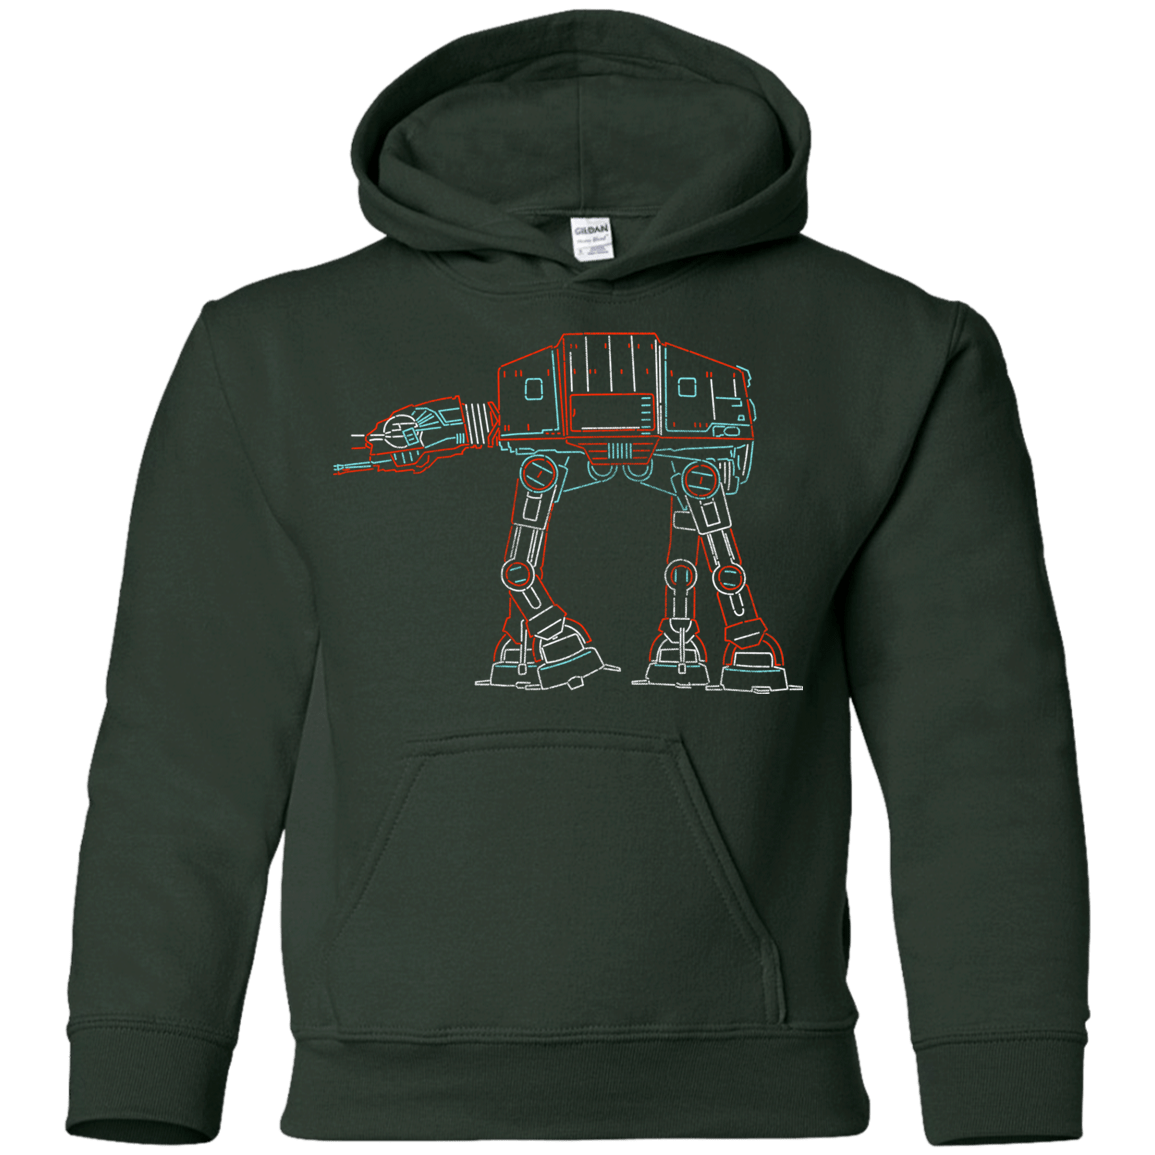 Sweatshirts Forest Green / YS Incoming Hothstiles Youth Hoodie